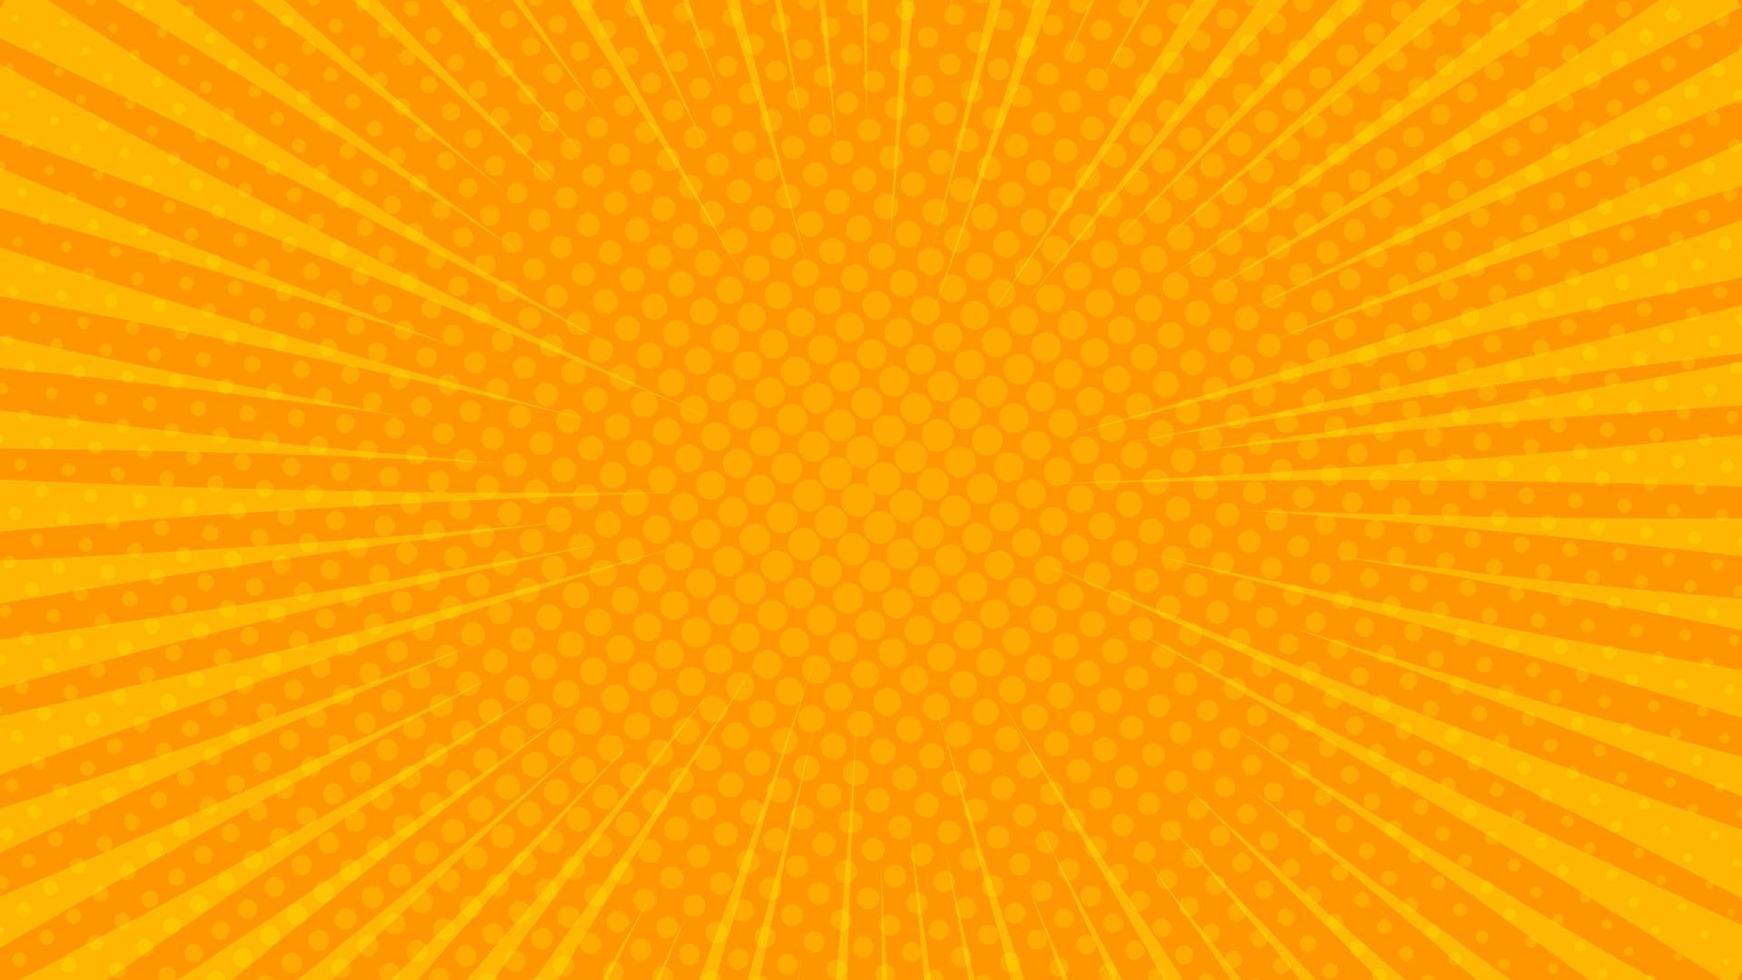 Orange comic book page background in pop art style with empty space. Template with rays, dots and halftone effect texture. Vector illustration